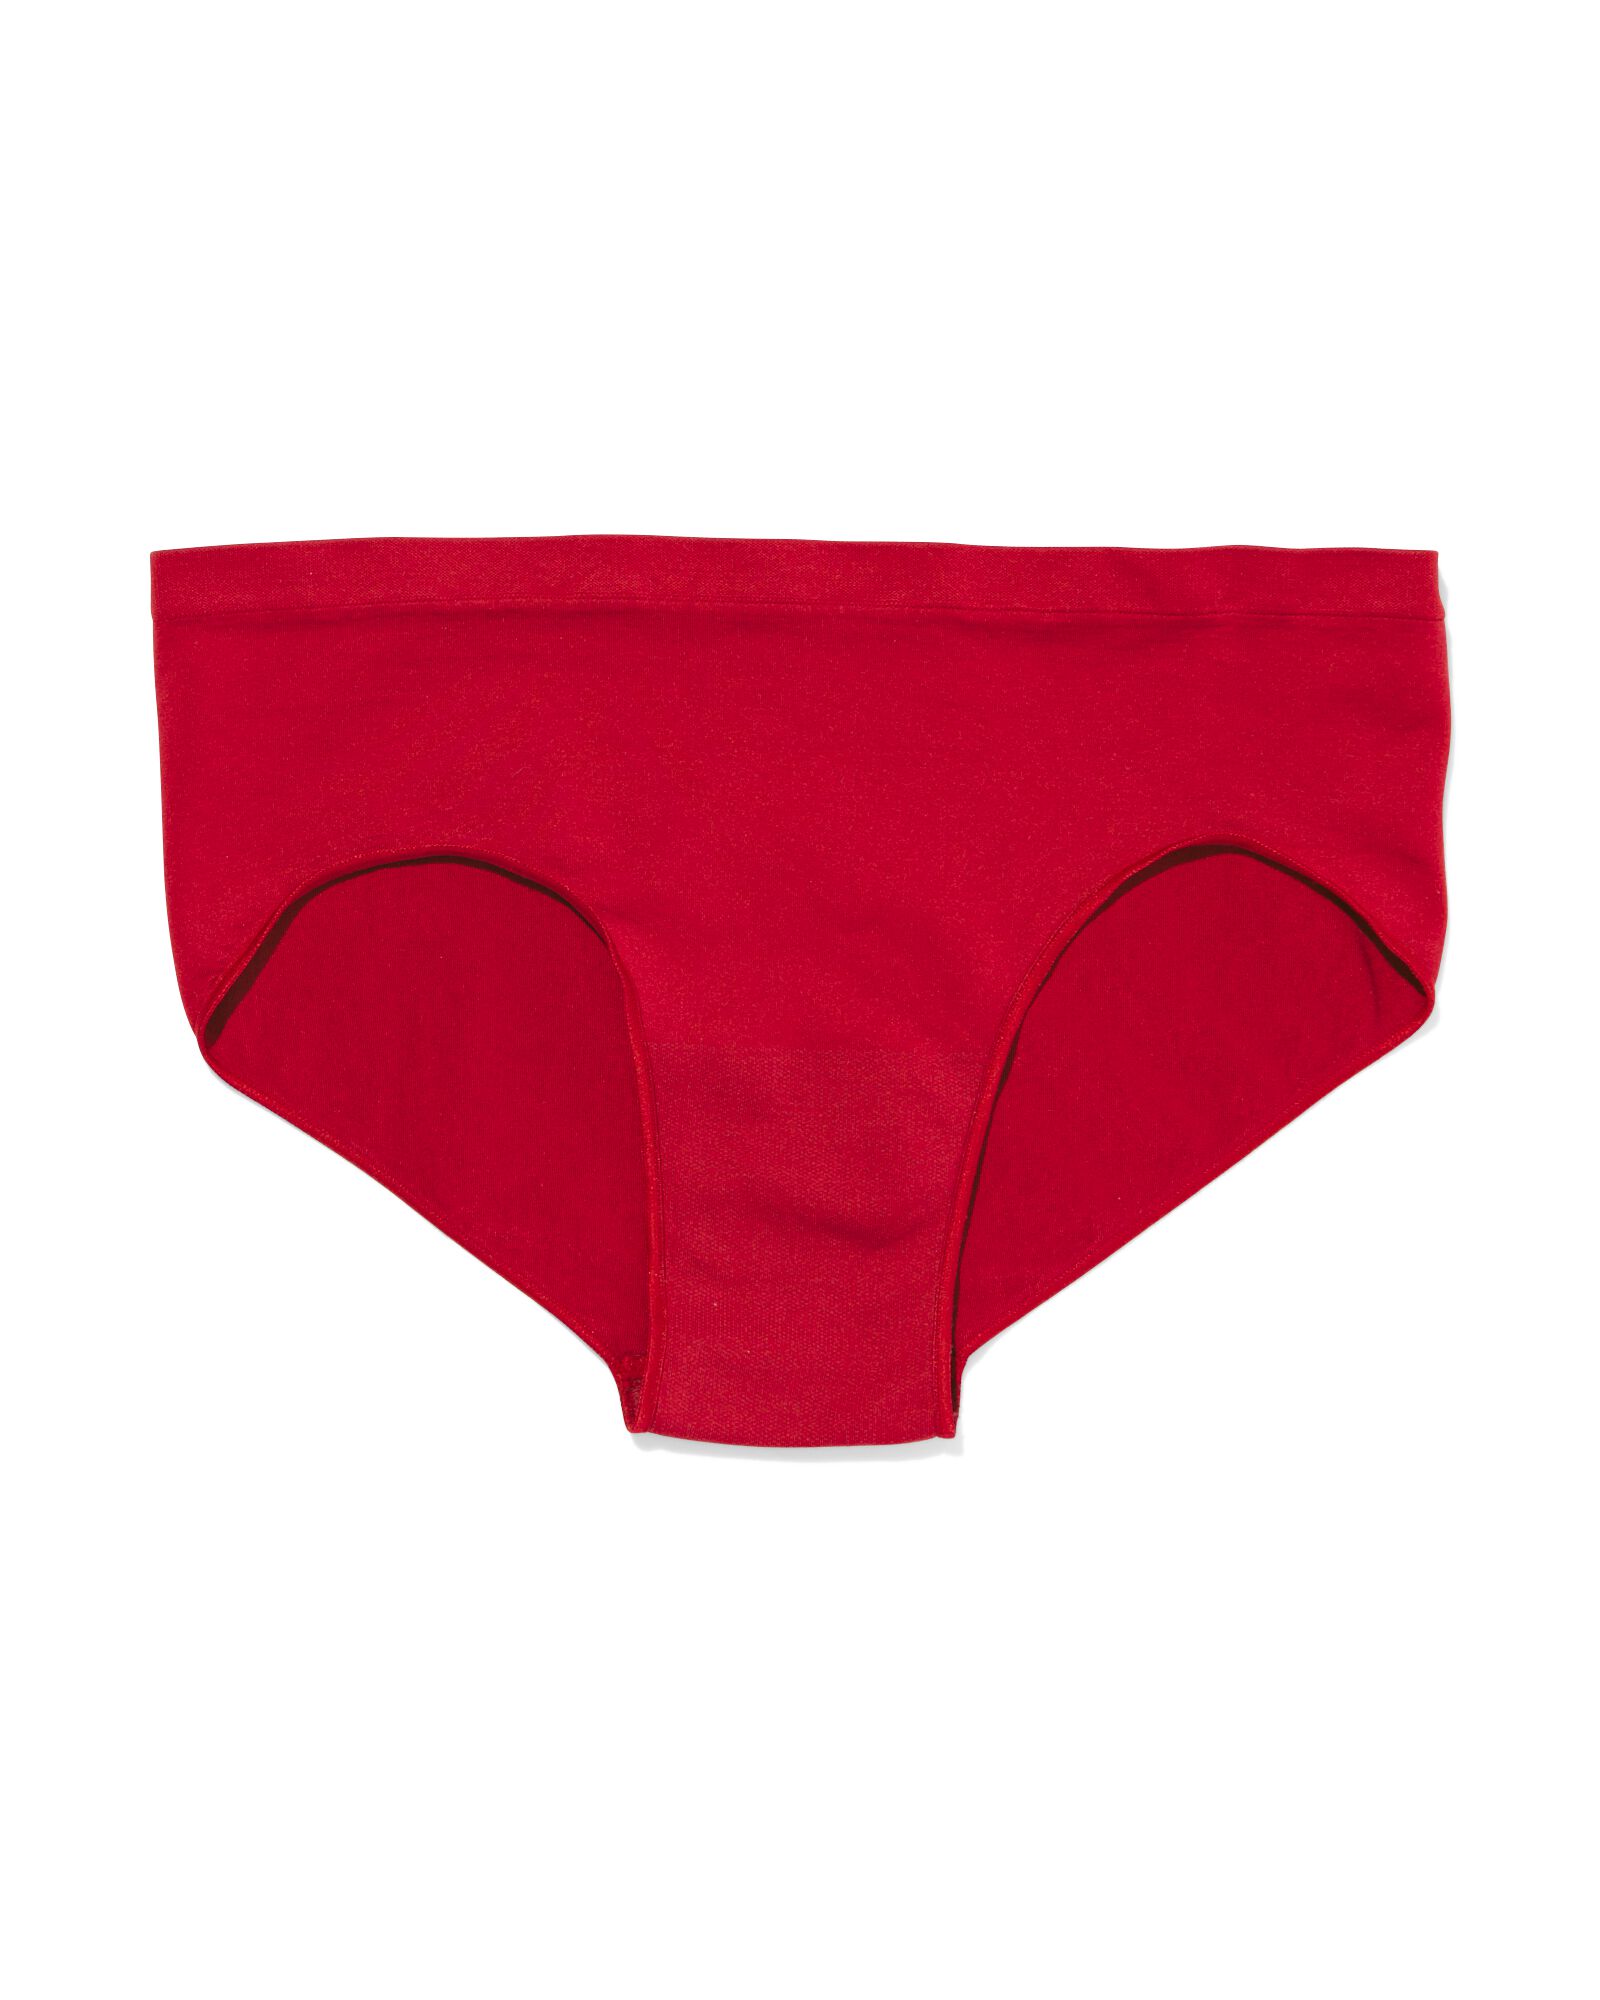 hipster femme sans coutures en micro rouge rouge - 19680290RED - HEMA